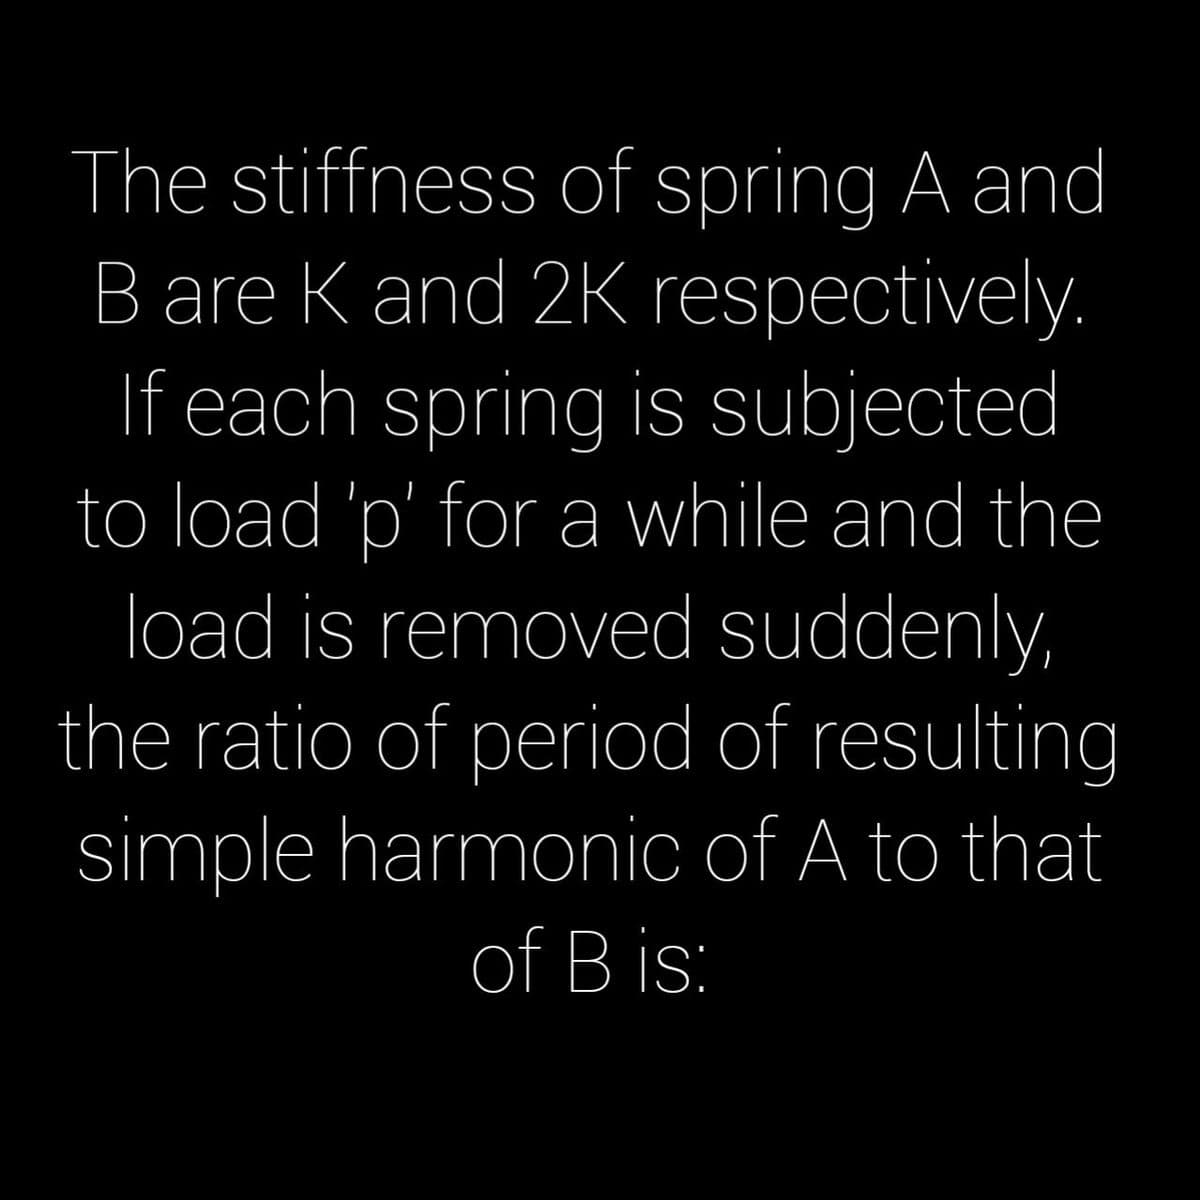 The stiffness of spring A and
B are K and 2K respectively.
If each spring is subjected
to load 'p' for a while and the
load is removed suddenly,
the ratio of period of resulting
simple harmonic of A to that
of B is:
